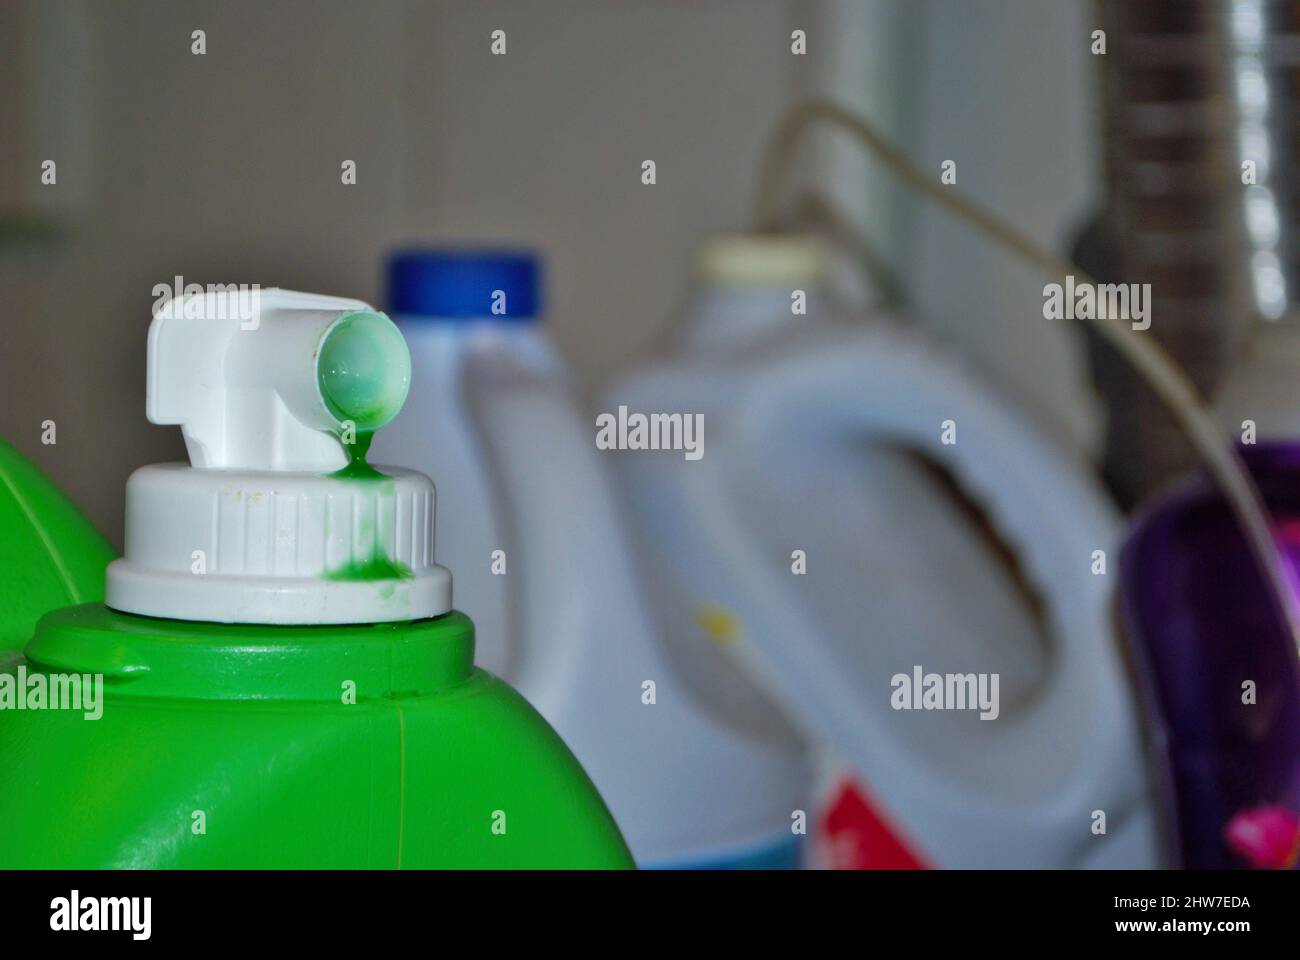 Closeup of laundry detergent fabric softener bleach and dryer sheets in a basement laundry room Stock Photo